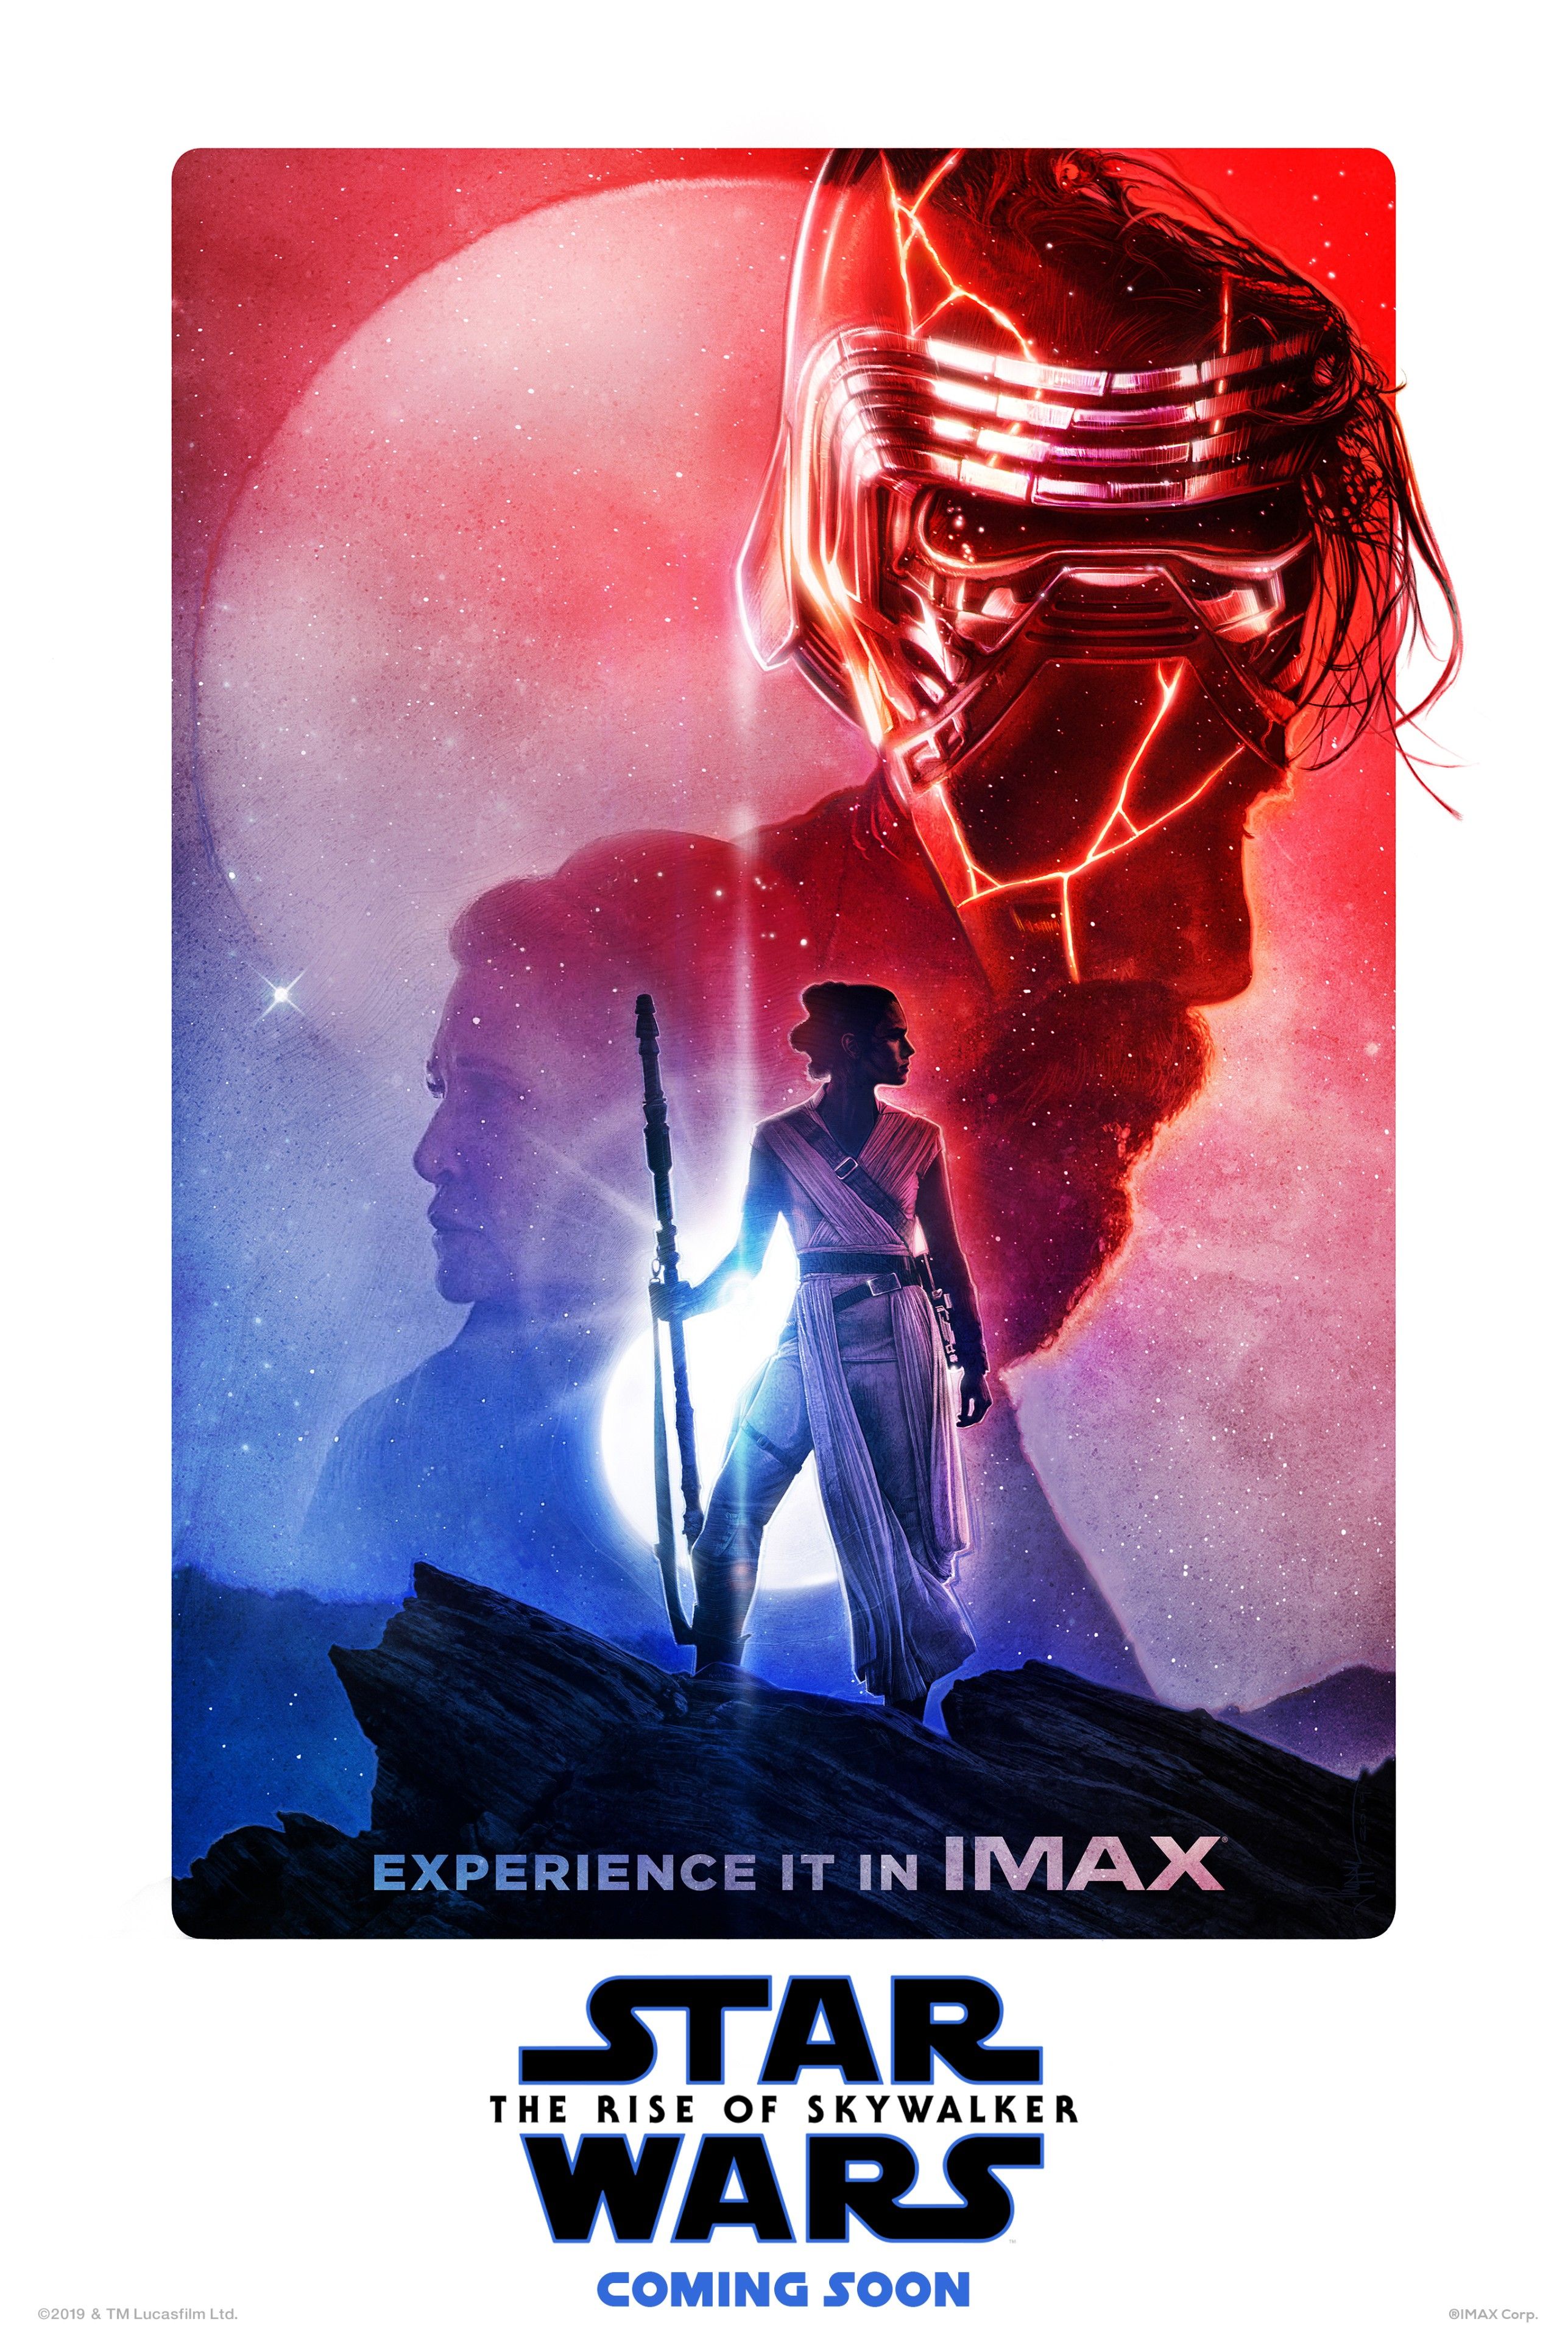 Star Wars The Rise of Skywalker IMAX poster